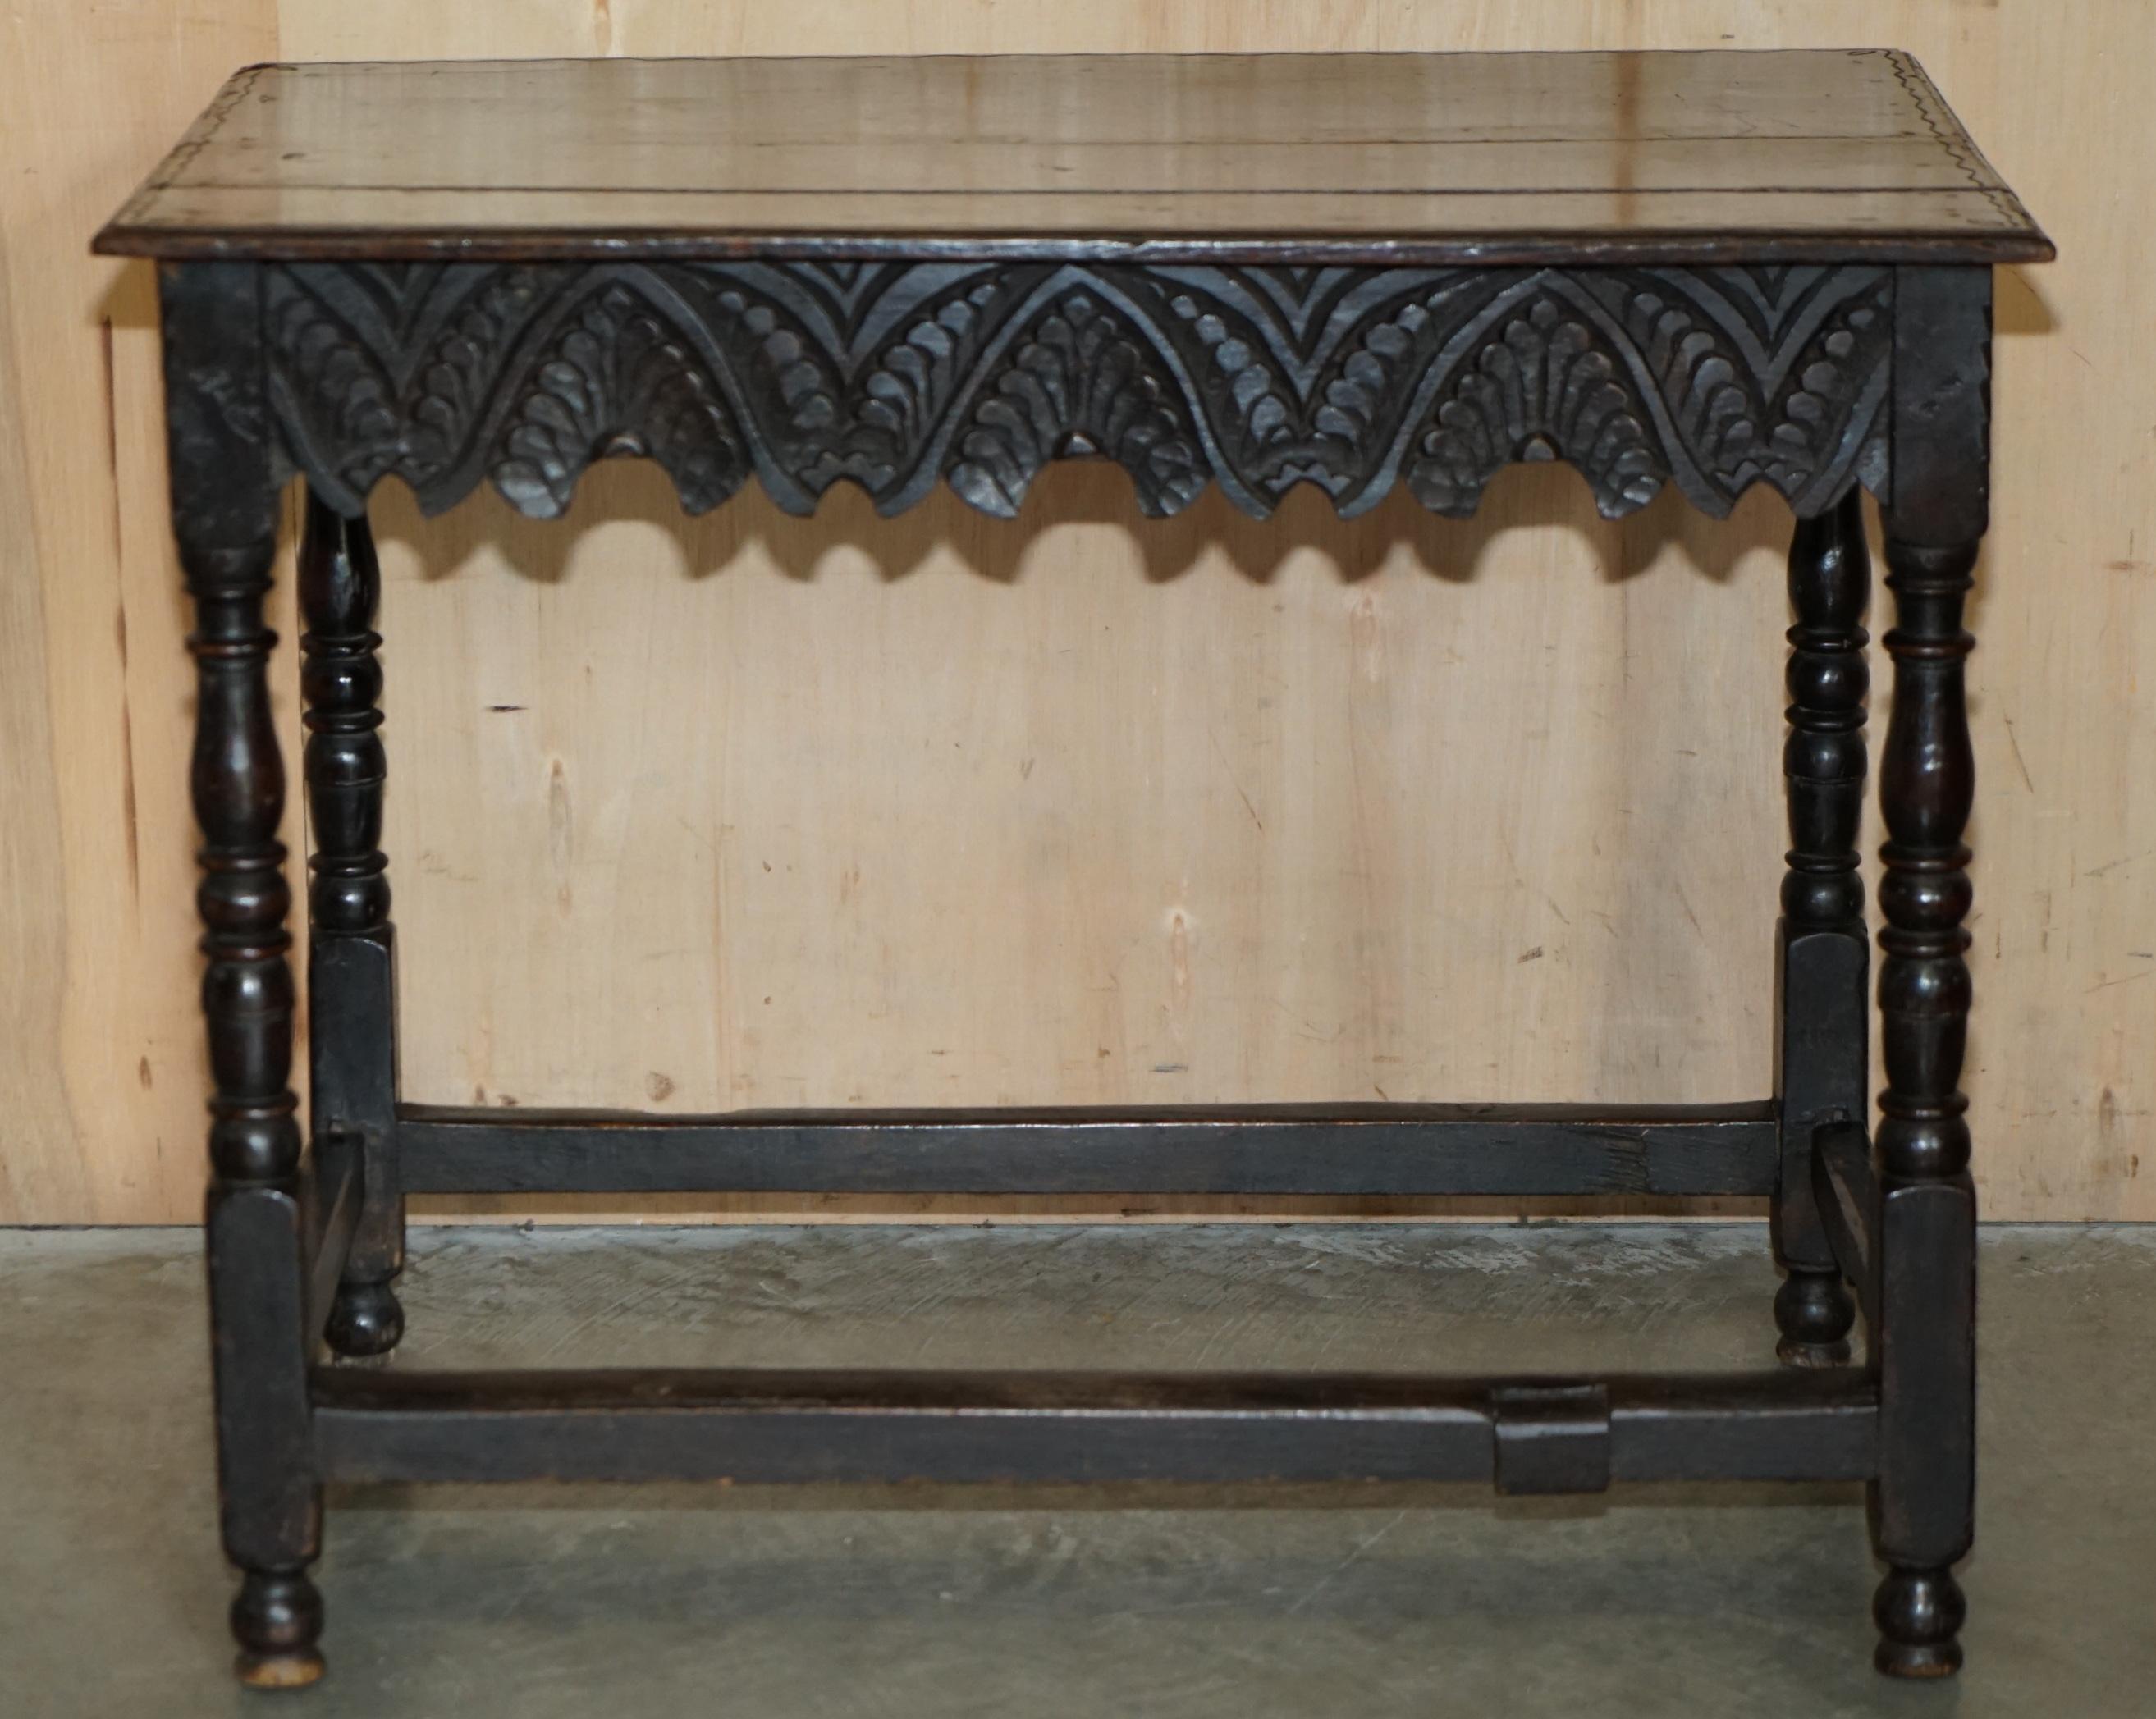 ANTIQUE ENGLISH 18TH CENTURY JACOBEAN CENTRE TABLE WiTH ORNATELY CARVED APRON For Sale 7